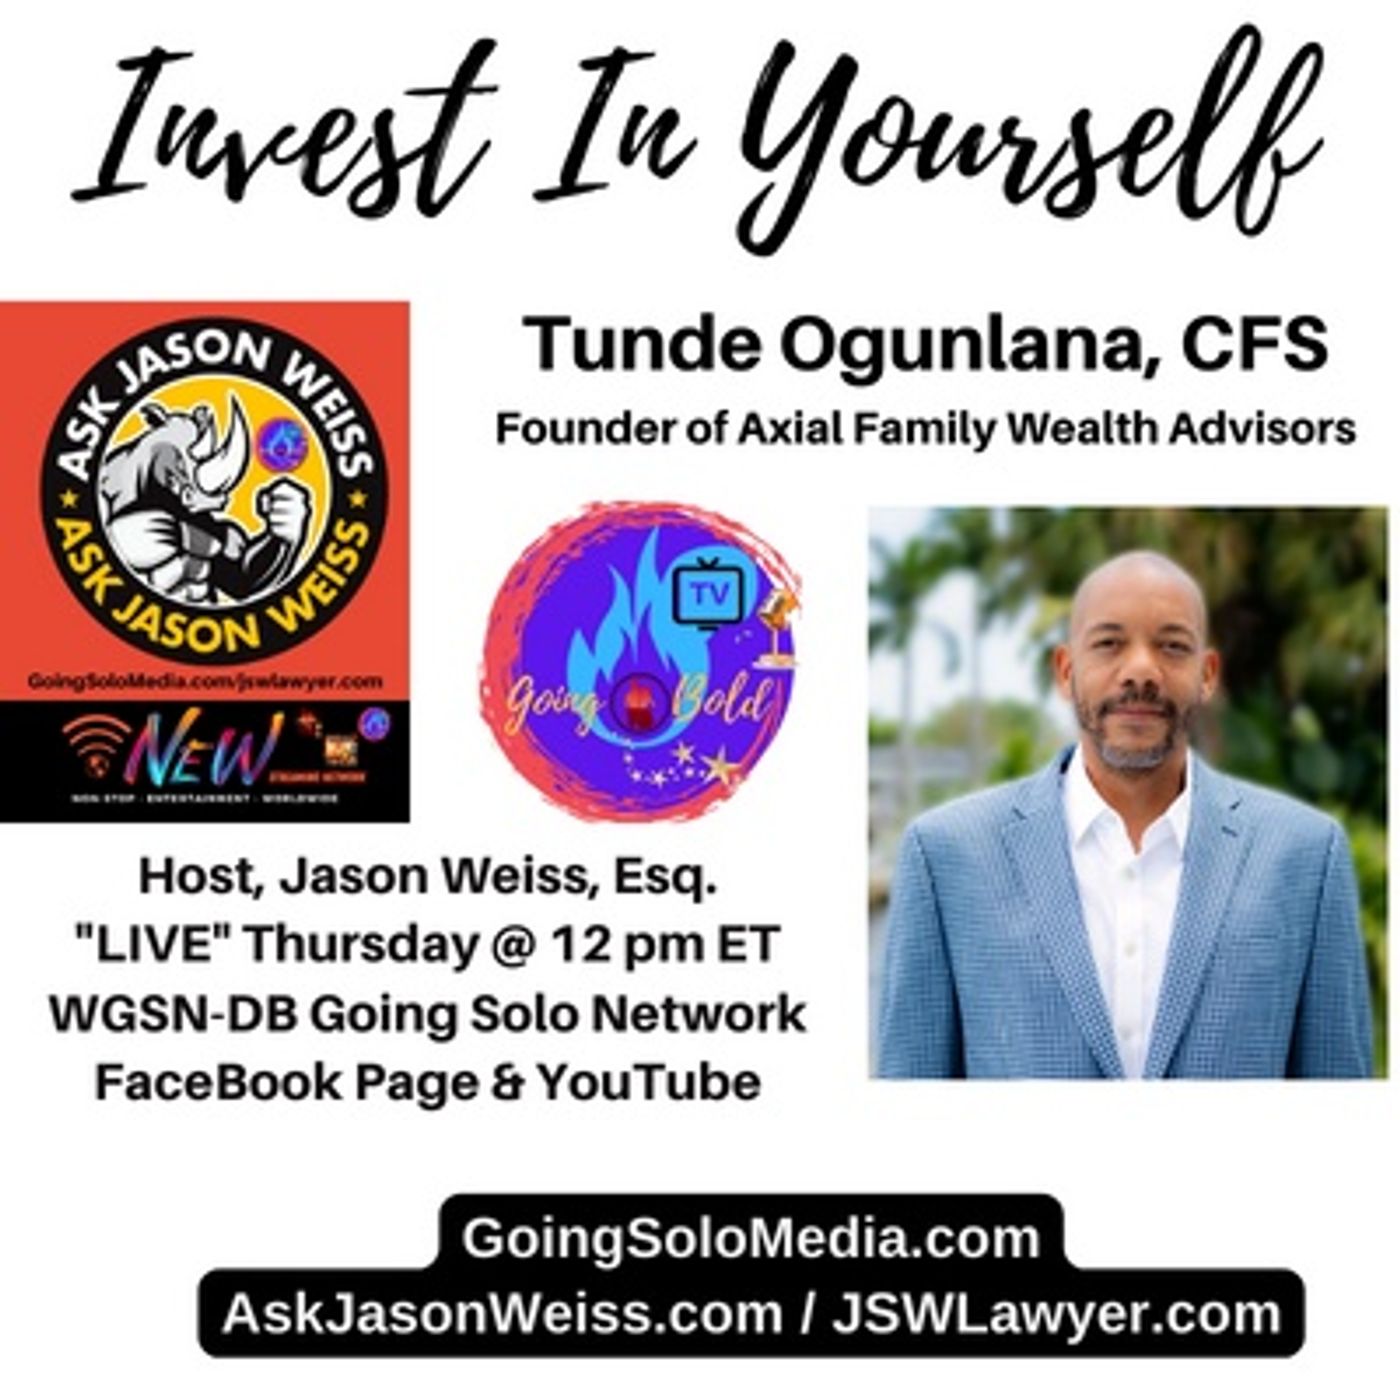 Invest In Yourself with Tunde Ogunlana